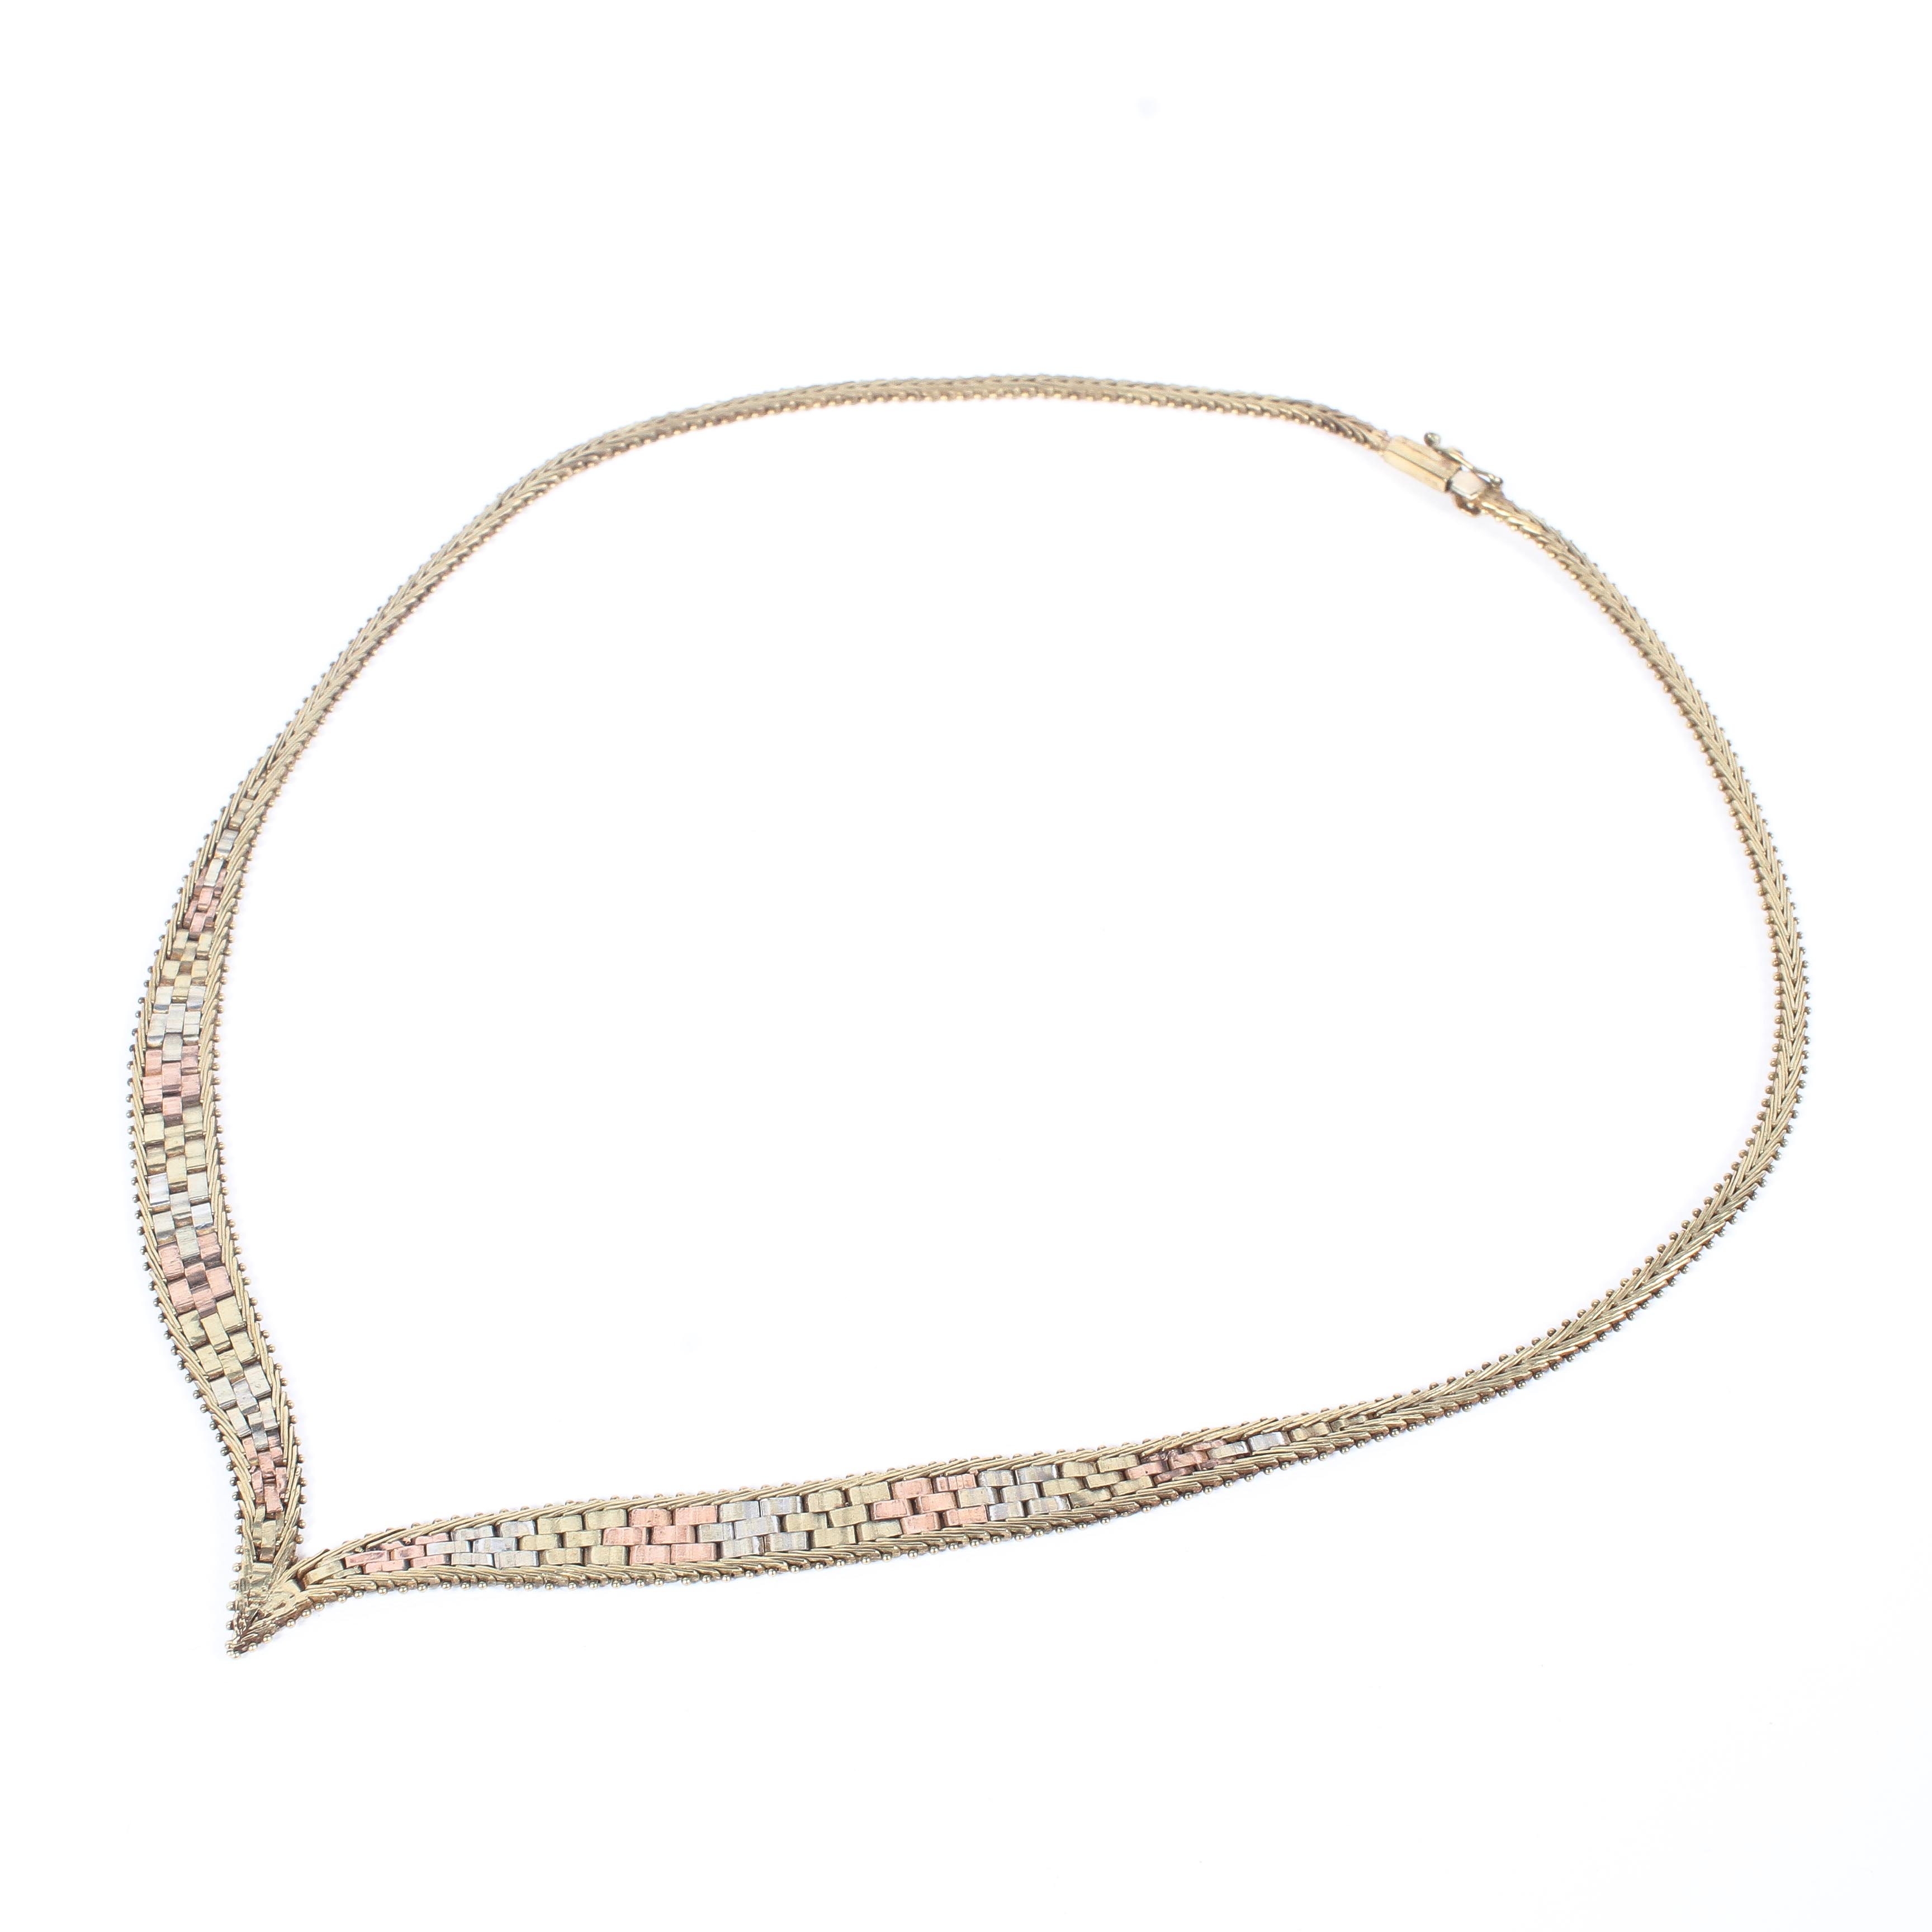 A vintage 9ct gold tri-coloured flat weave necklace, featuring yellow,